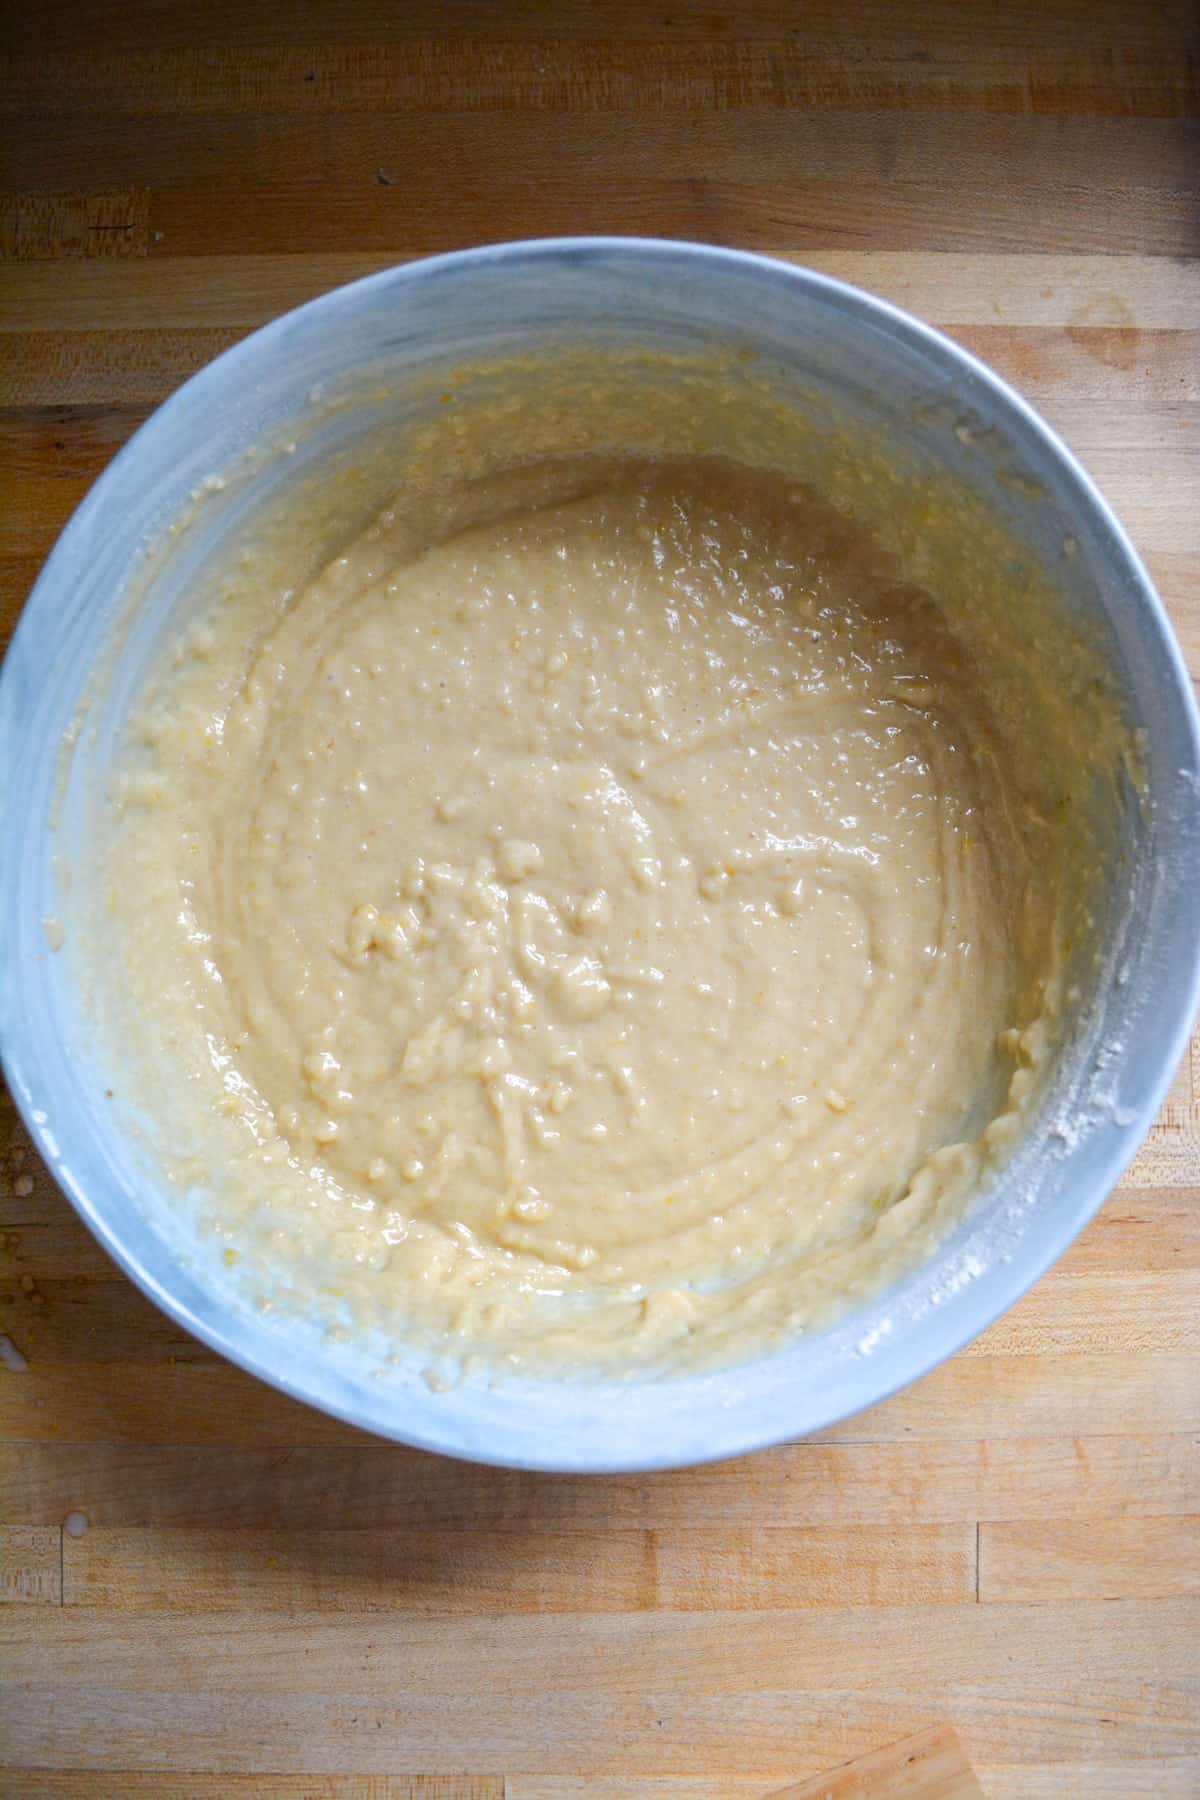 Muffin batter in a mixing bowl.